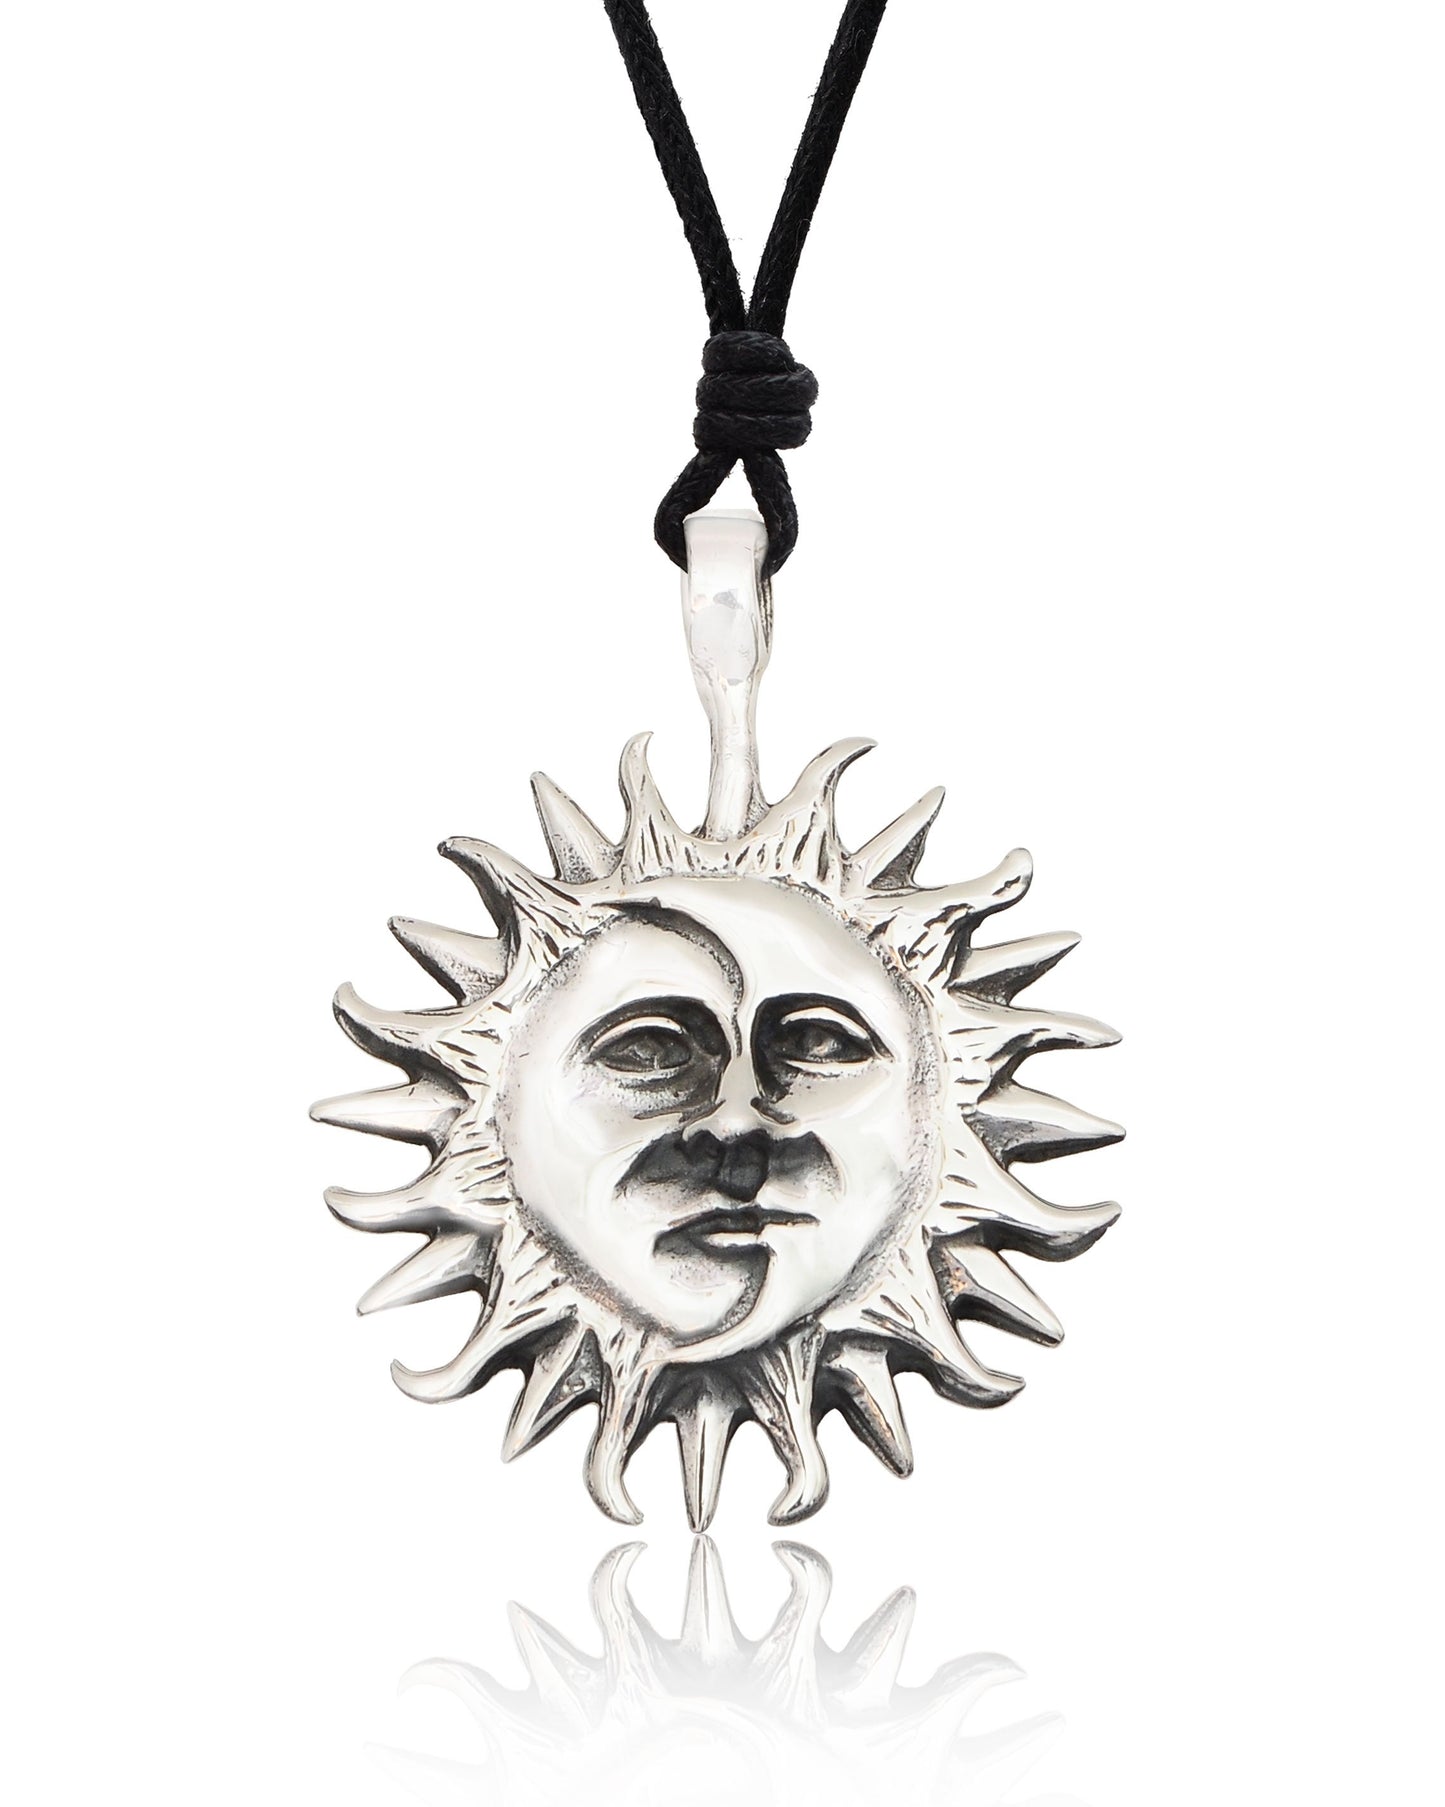 Ying Yang Sun & Moon 92.5 Sterling Silver Brass Charm Necklace Pendant Jewelry